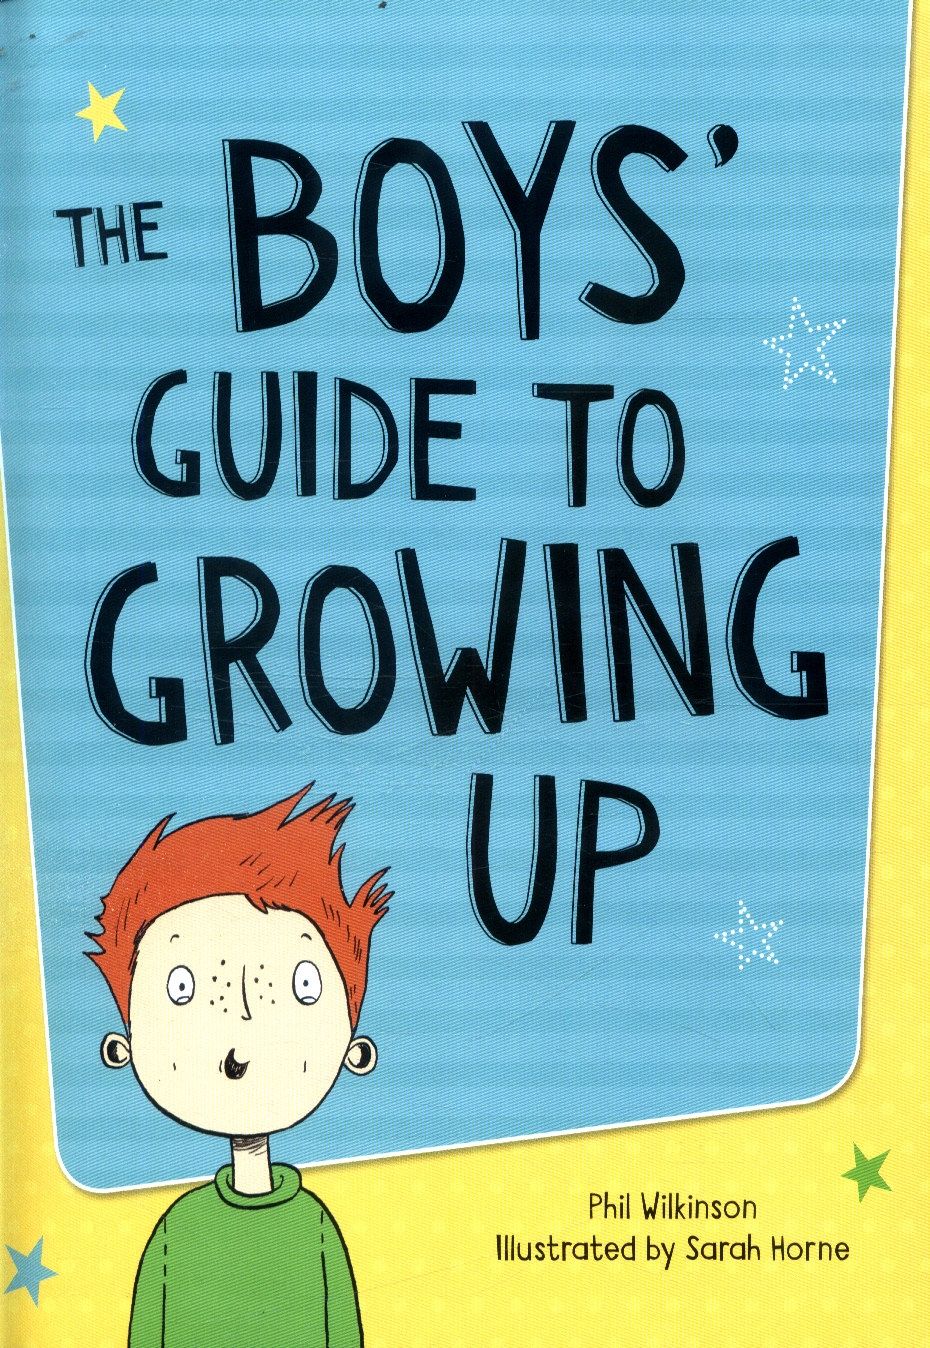 The Boys' Guide to Growing Up: the best-selling puberty guide for boys  eBook by Phil Wilkinson - EPUB Book